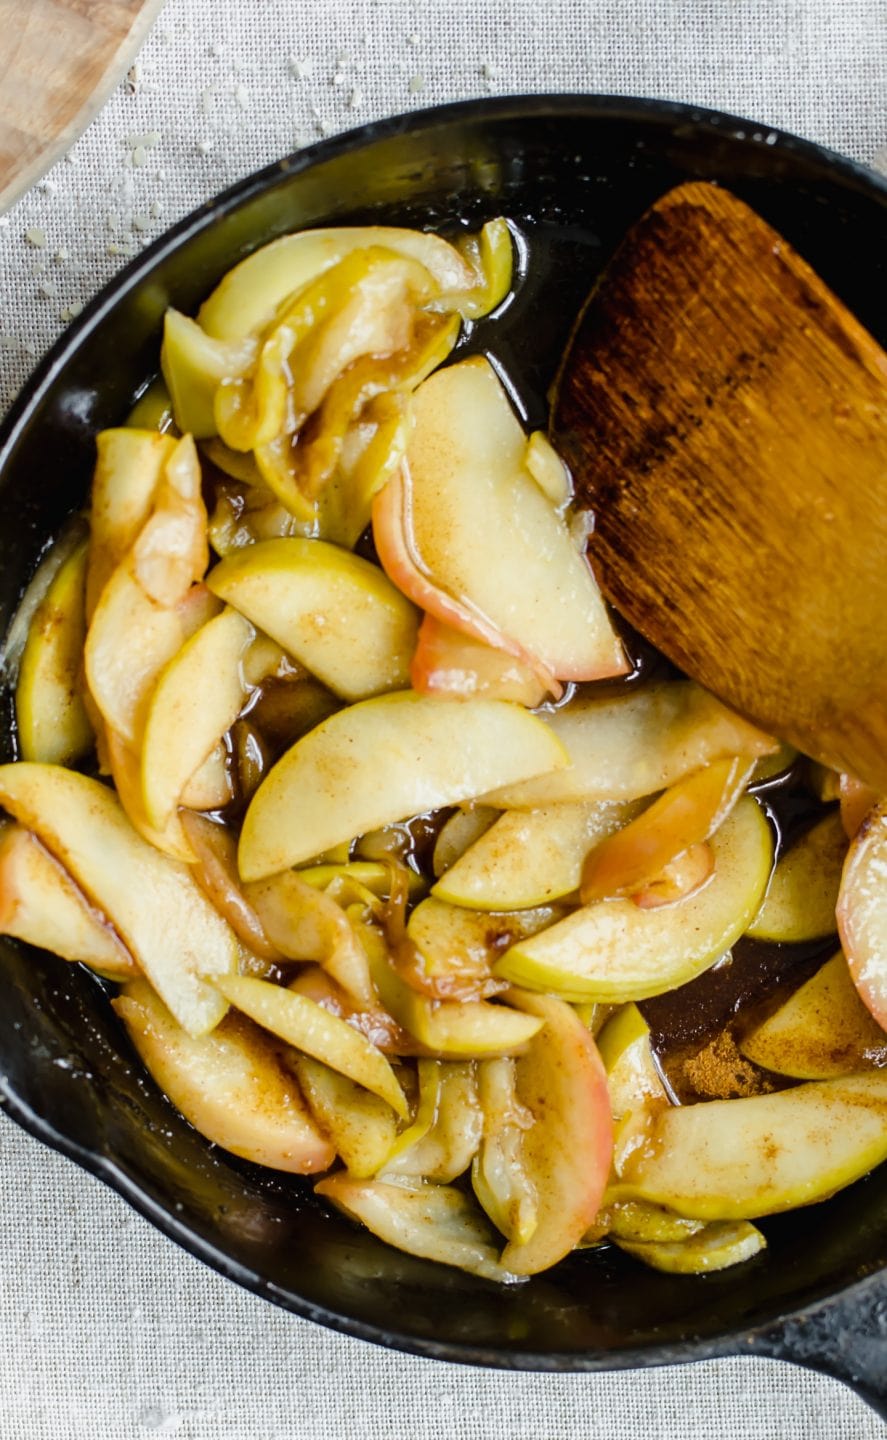 A cast iron skillet with sauteed cinnamon apples and a wooden spoon.